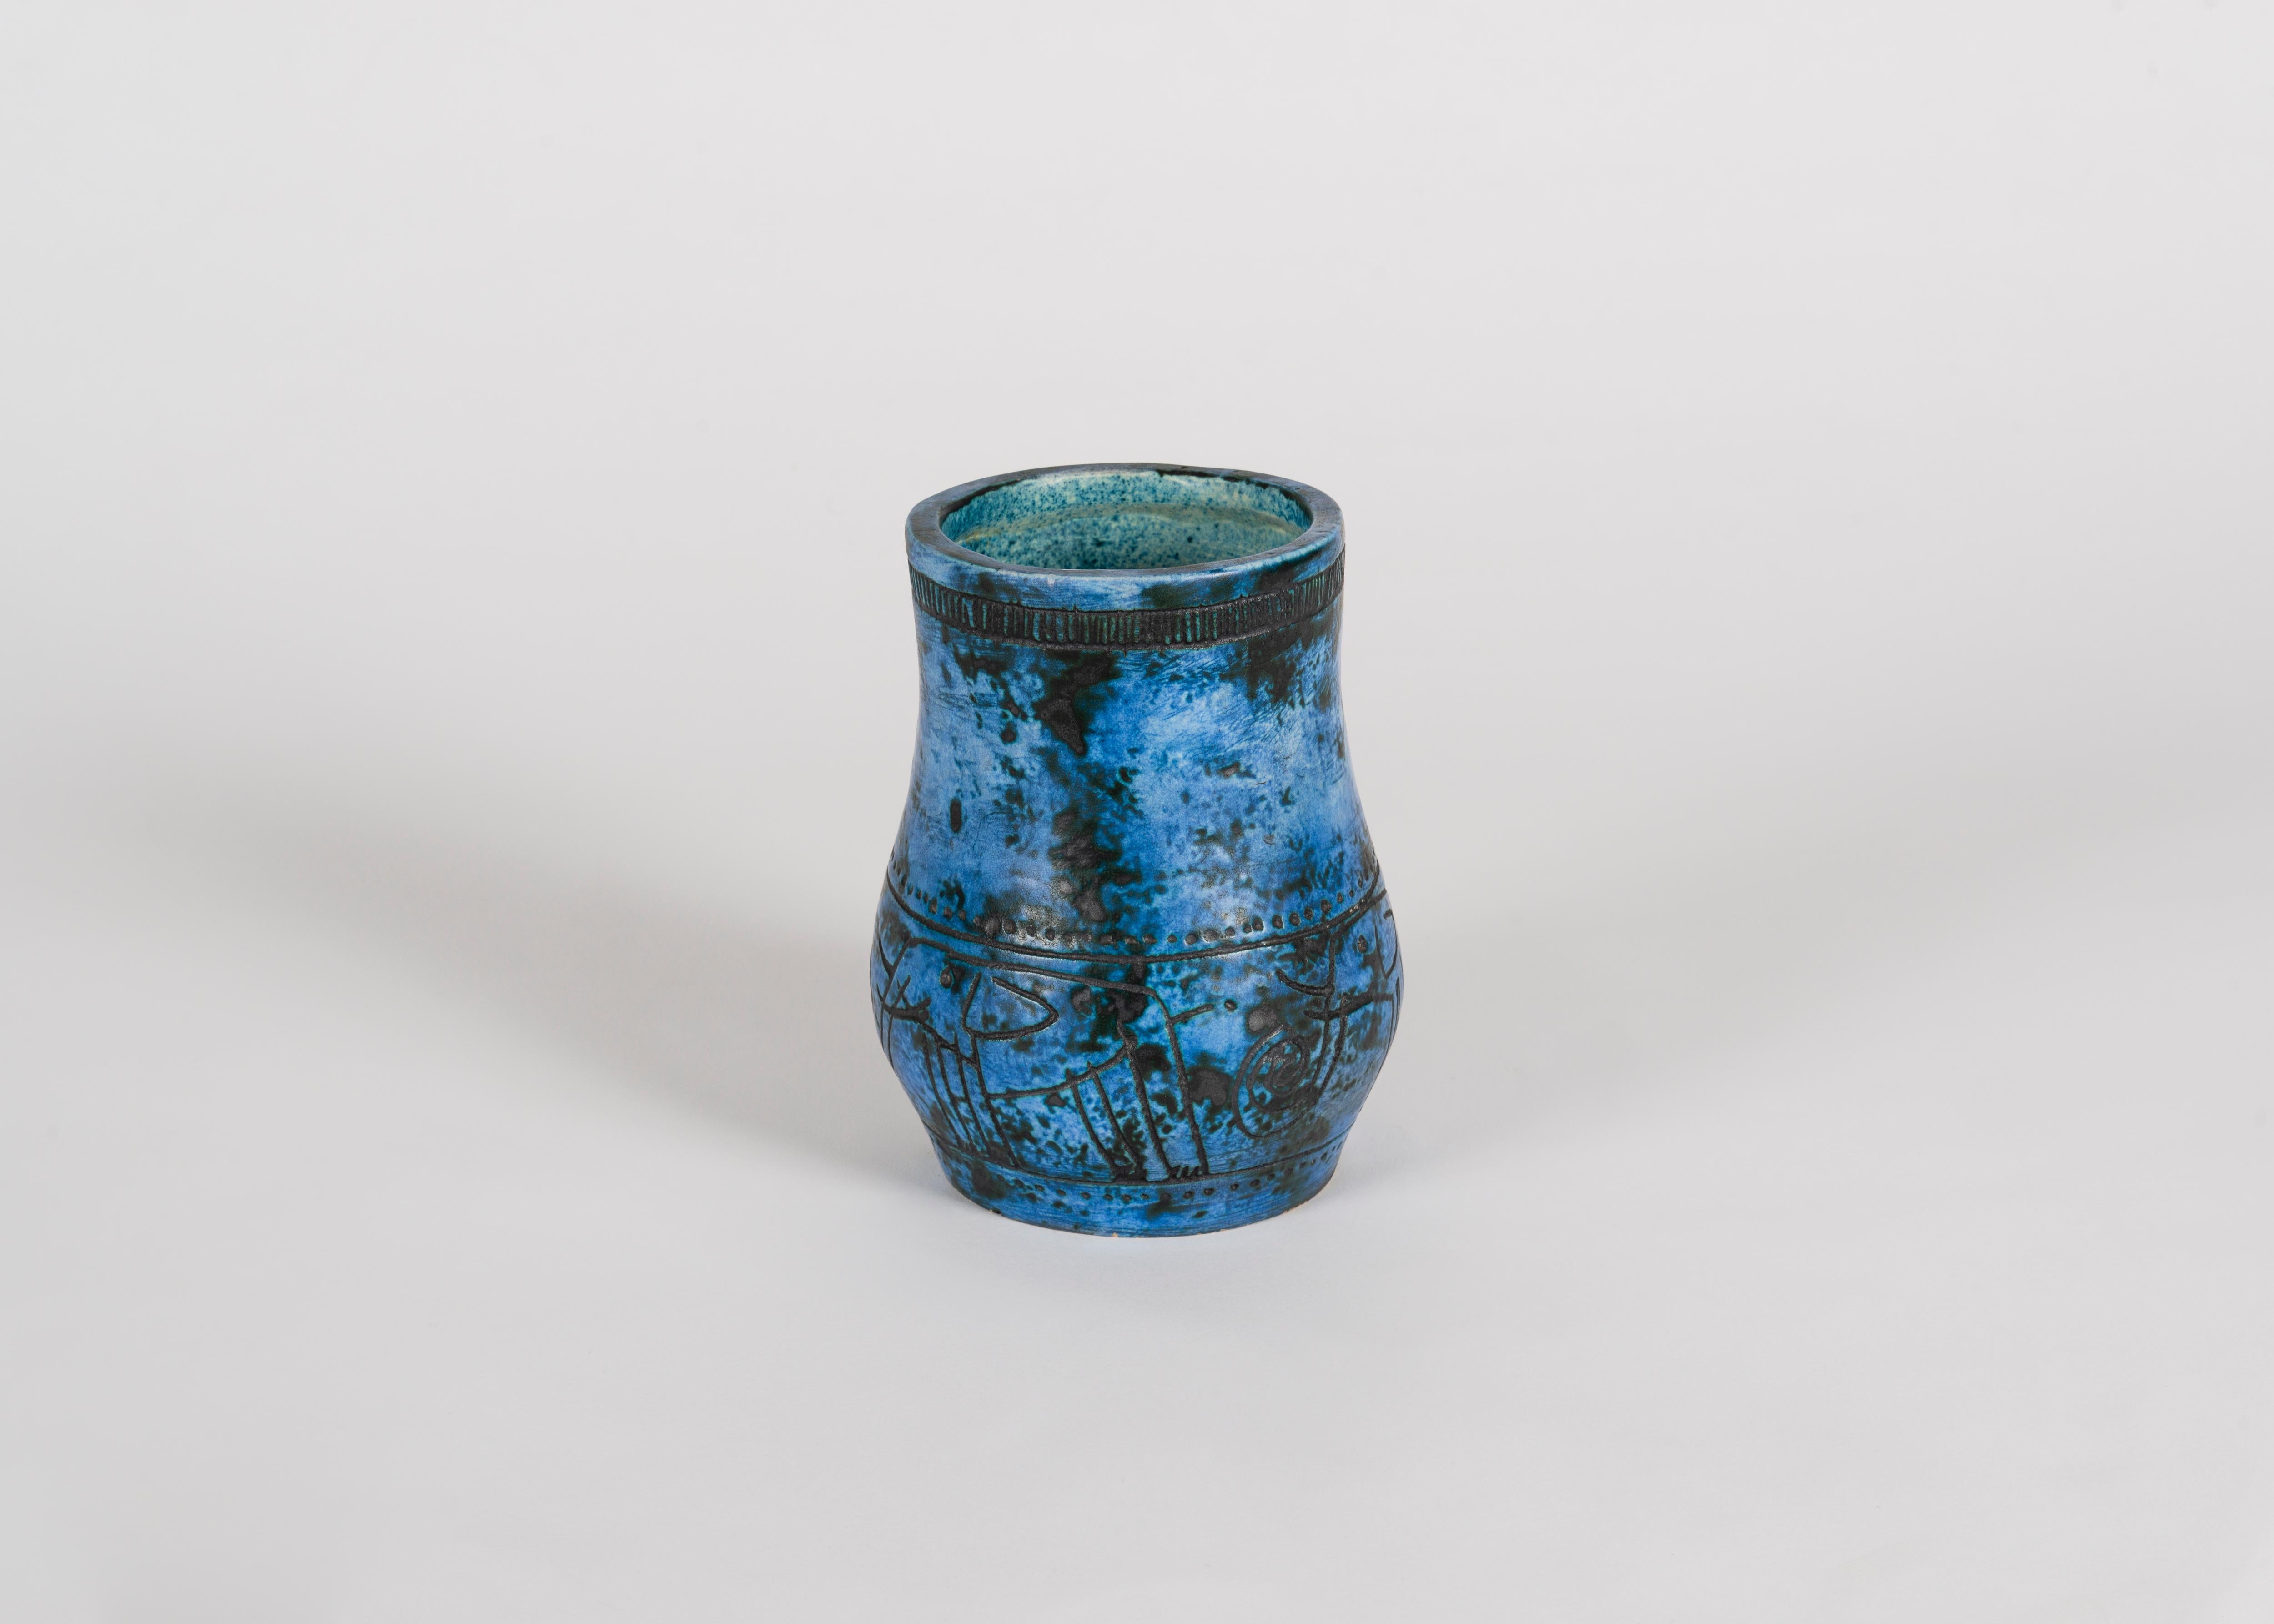 Incised vase by French ceramicist Jacques Blin.